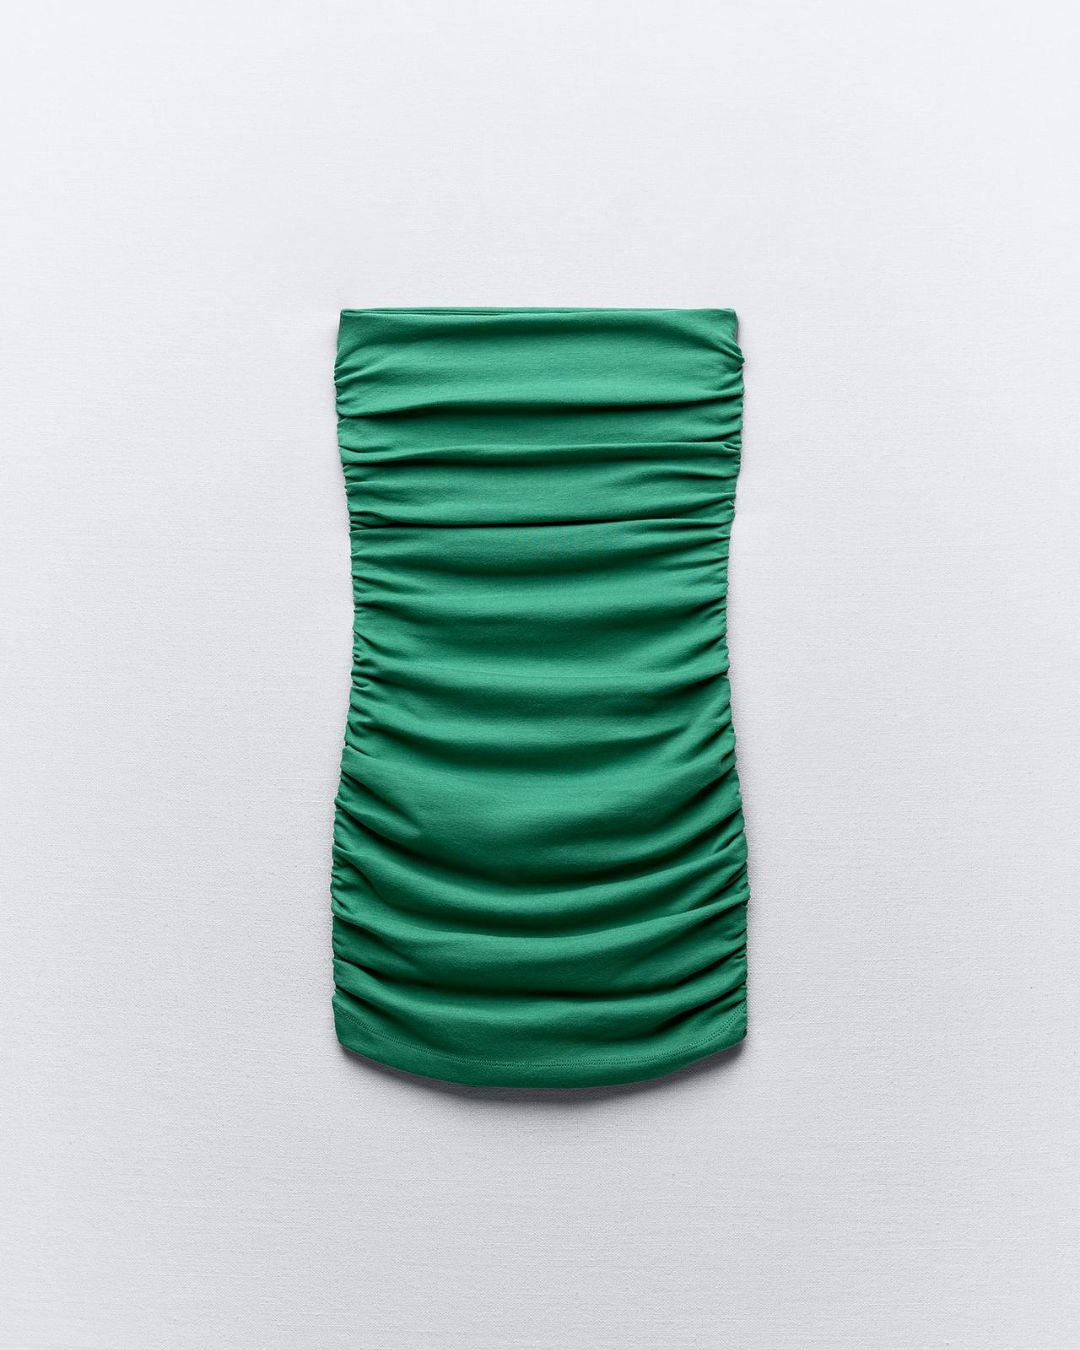 ruched-tube-dress-green,RUCHED TUBE DRESS,Color: Green
Fabric: Ribbed 
Type: Tube
Fit: Skinny Fit
Length: Mini
Neck: Off-Shoulder
Print: Solid 
Detail: Ruched  ,dresses,dresses,party,streetwear,knitted, stretchable,ribbed,green,solid,ruched,skinny fit,tube,mini,off shoulder neck,sleeveless,Manufacturing batch1_June19